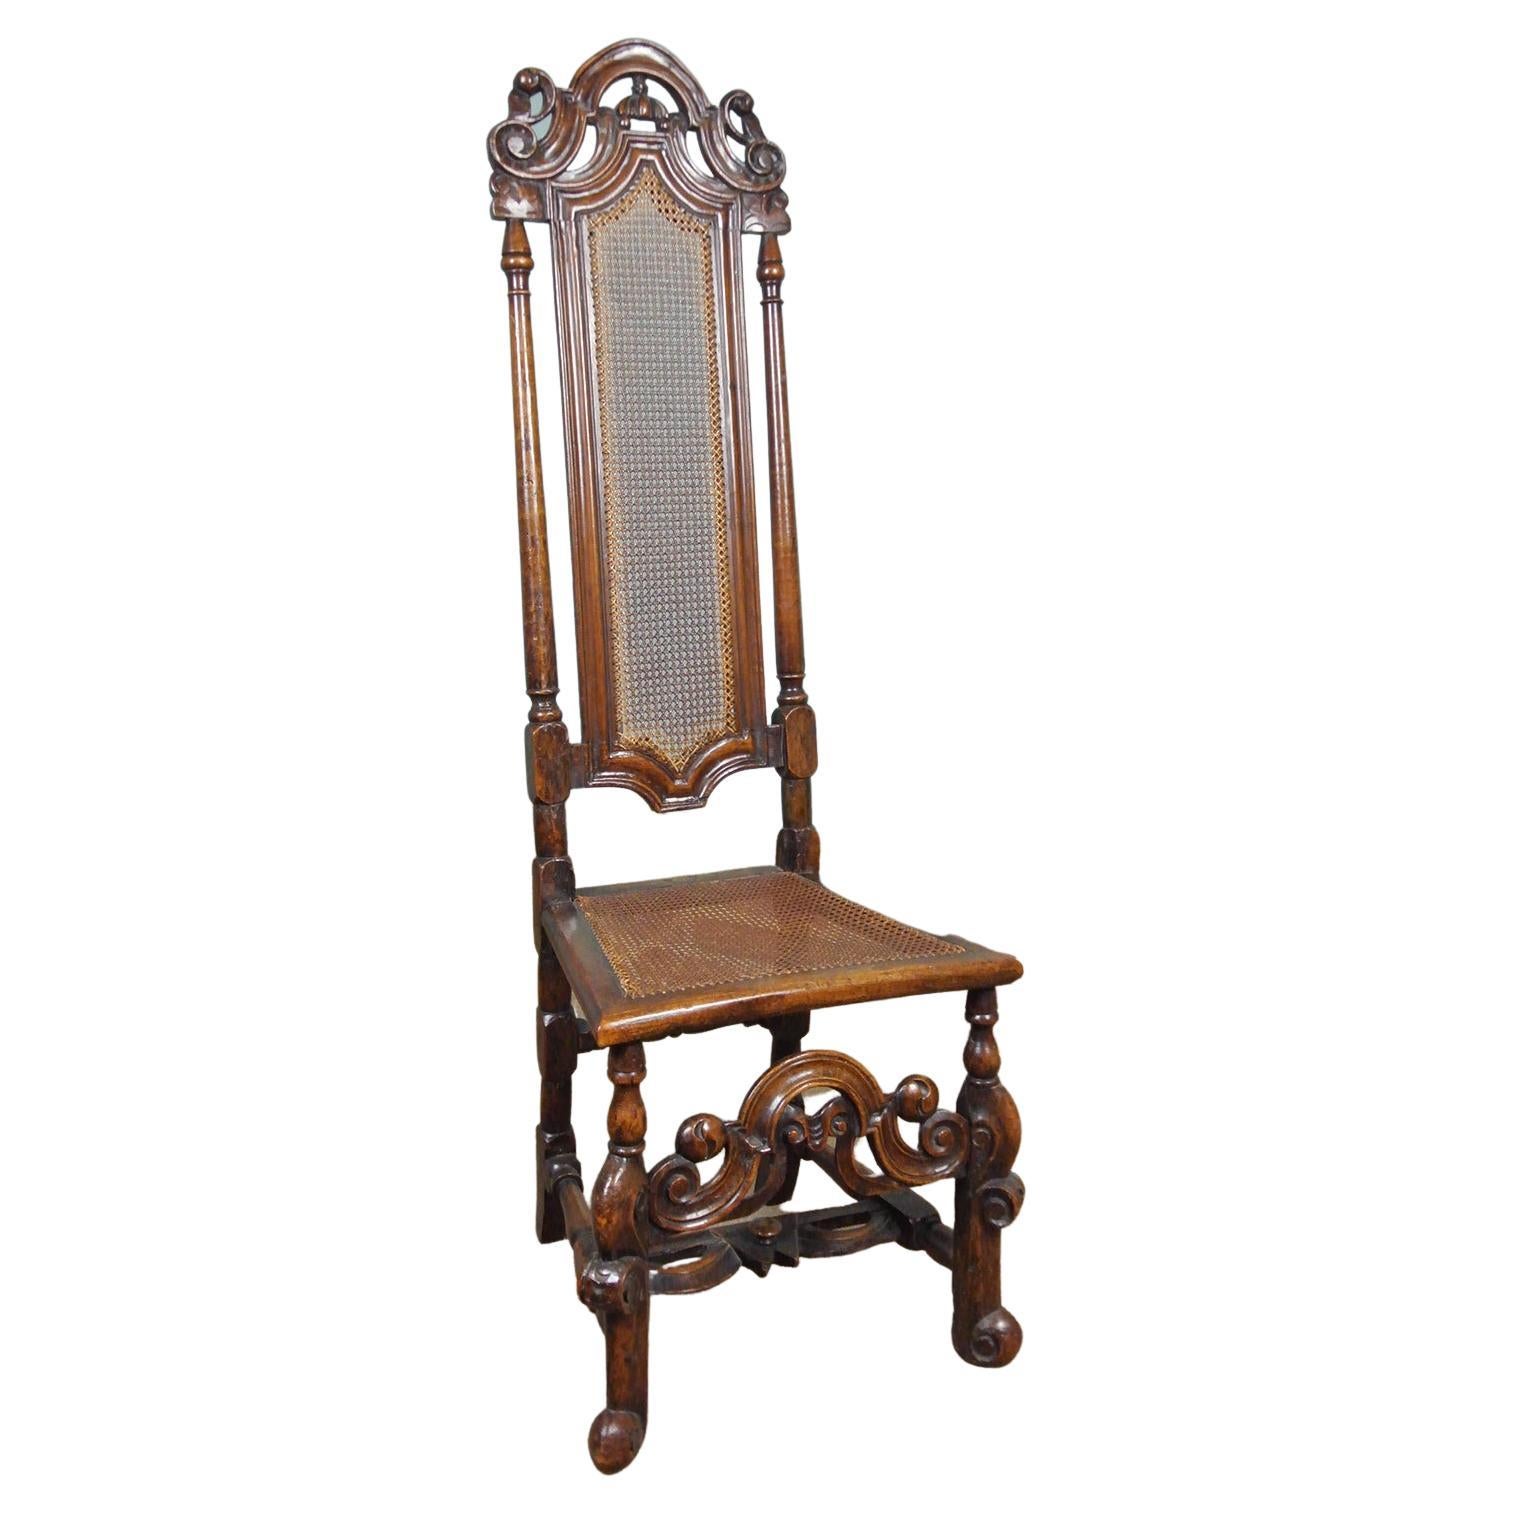 William and Mary Baroque Walnut Chair c.1690